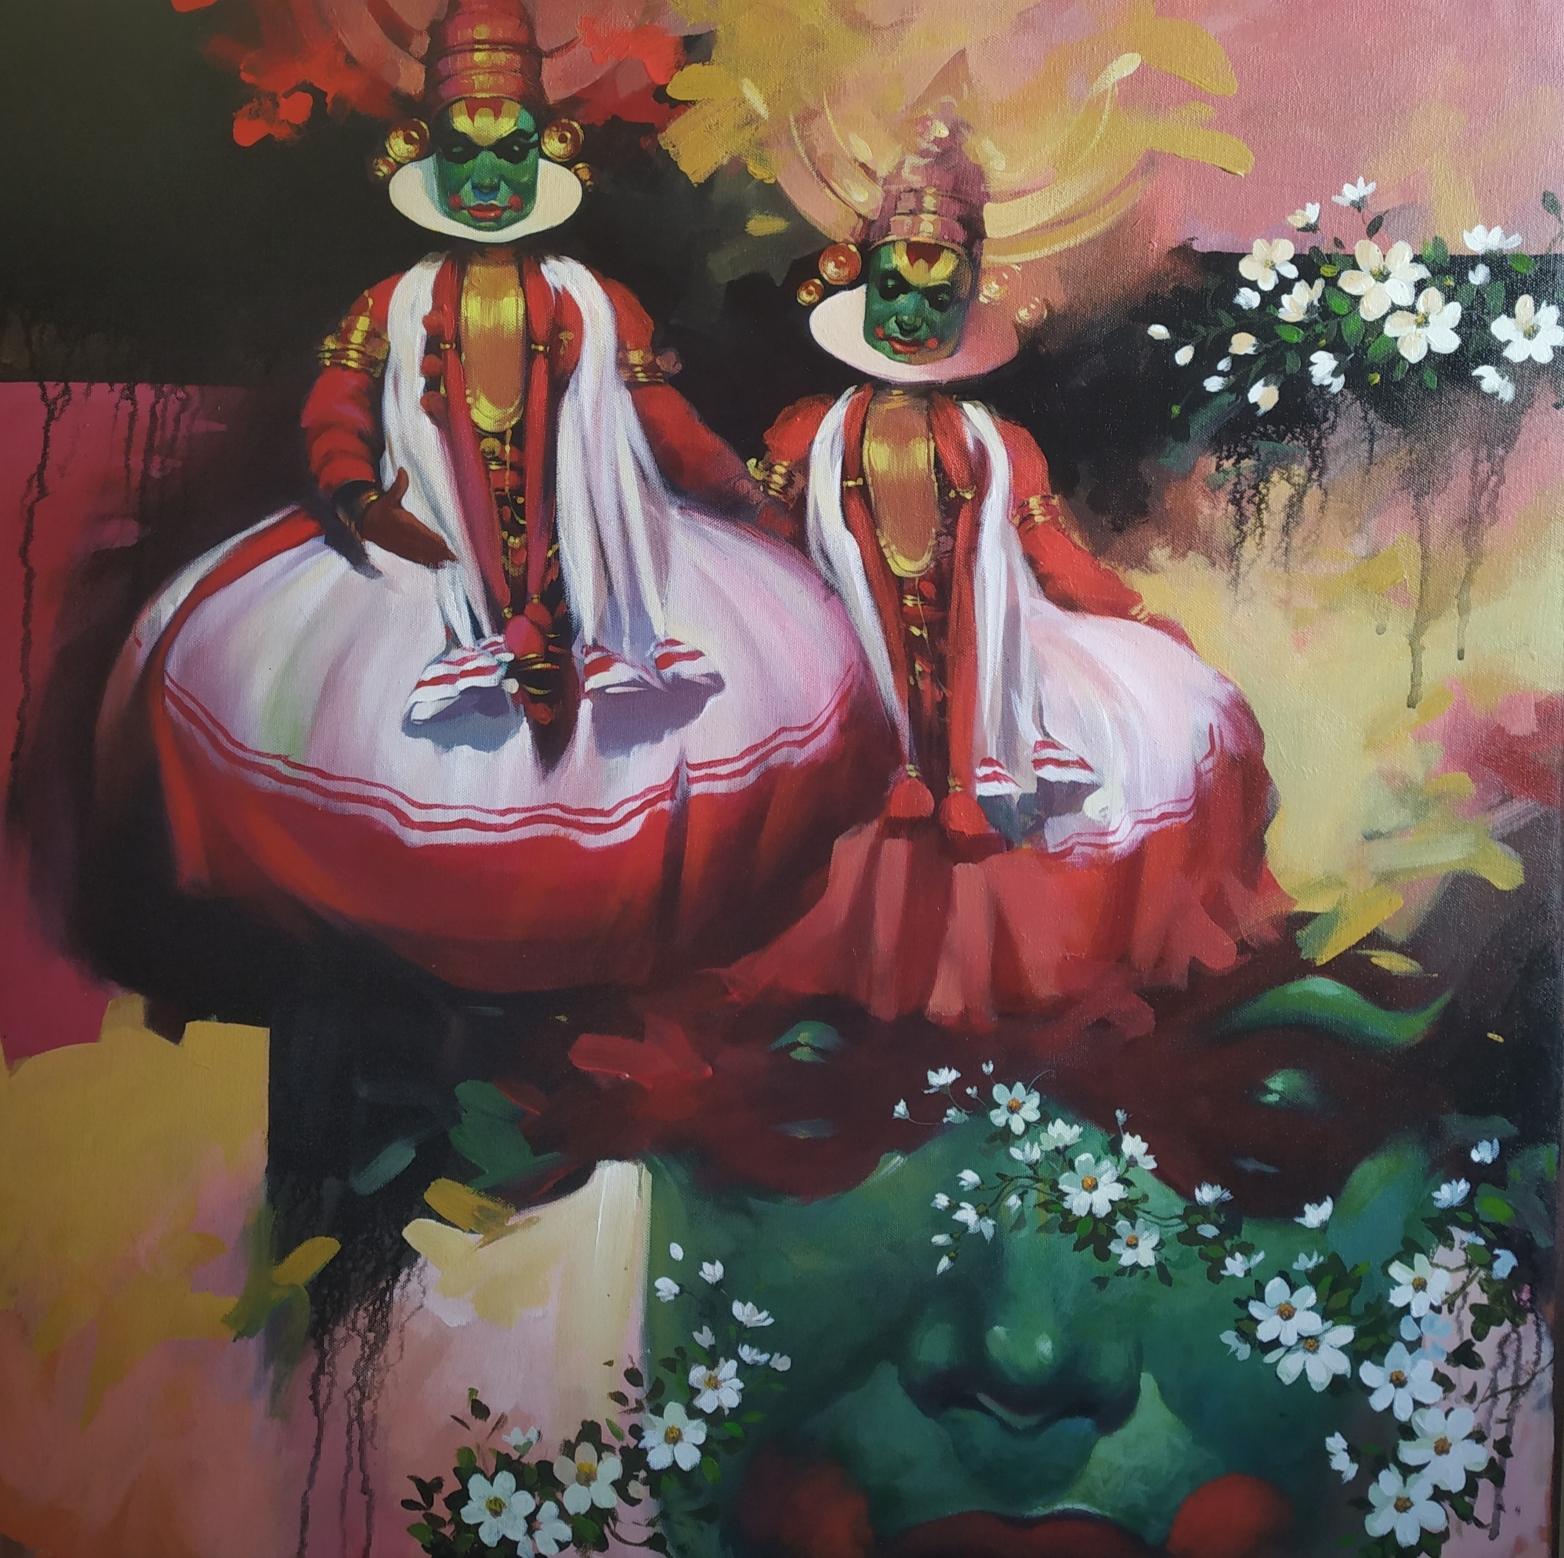 Bappa Halder  Figurative Painting - Rhythm-2, Dancers, Acrylic on Canvas, Green, Red, Contemporary Artist "In Stock"